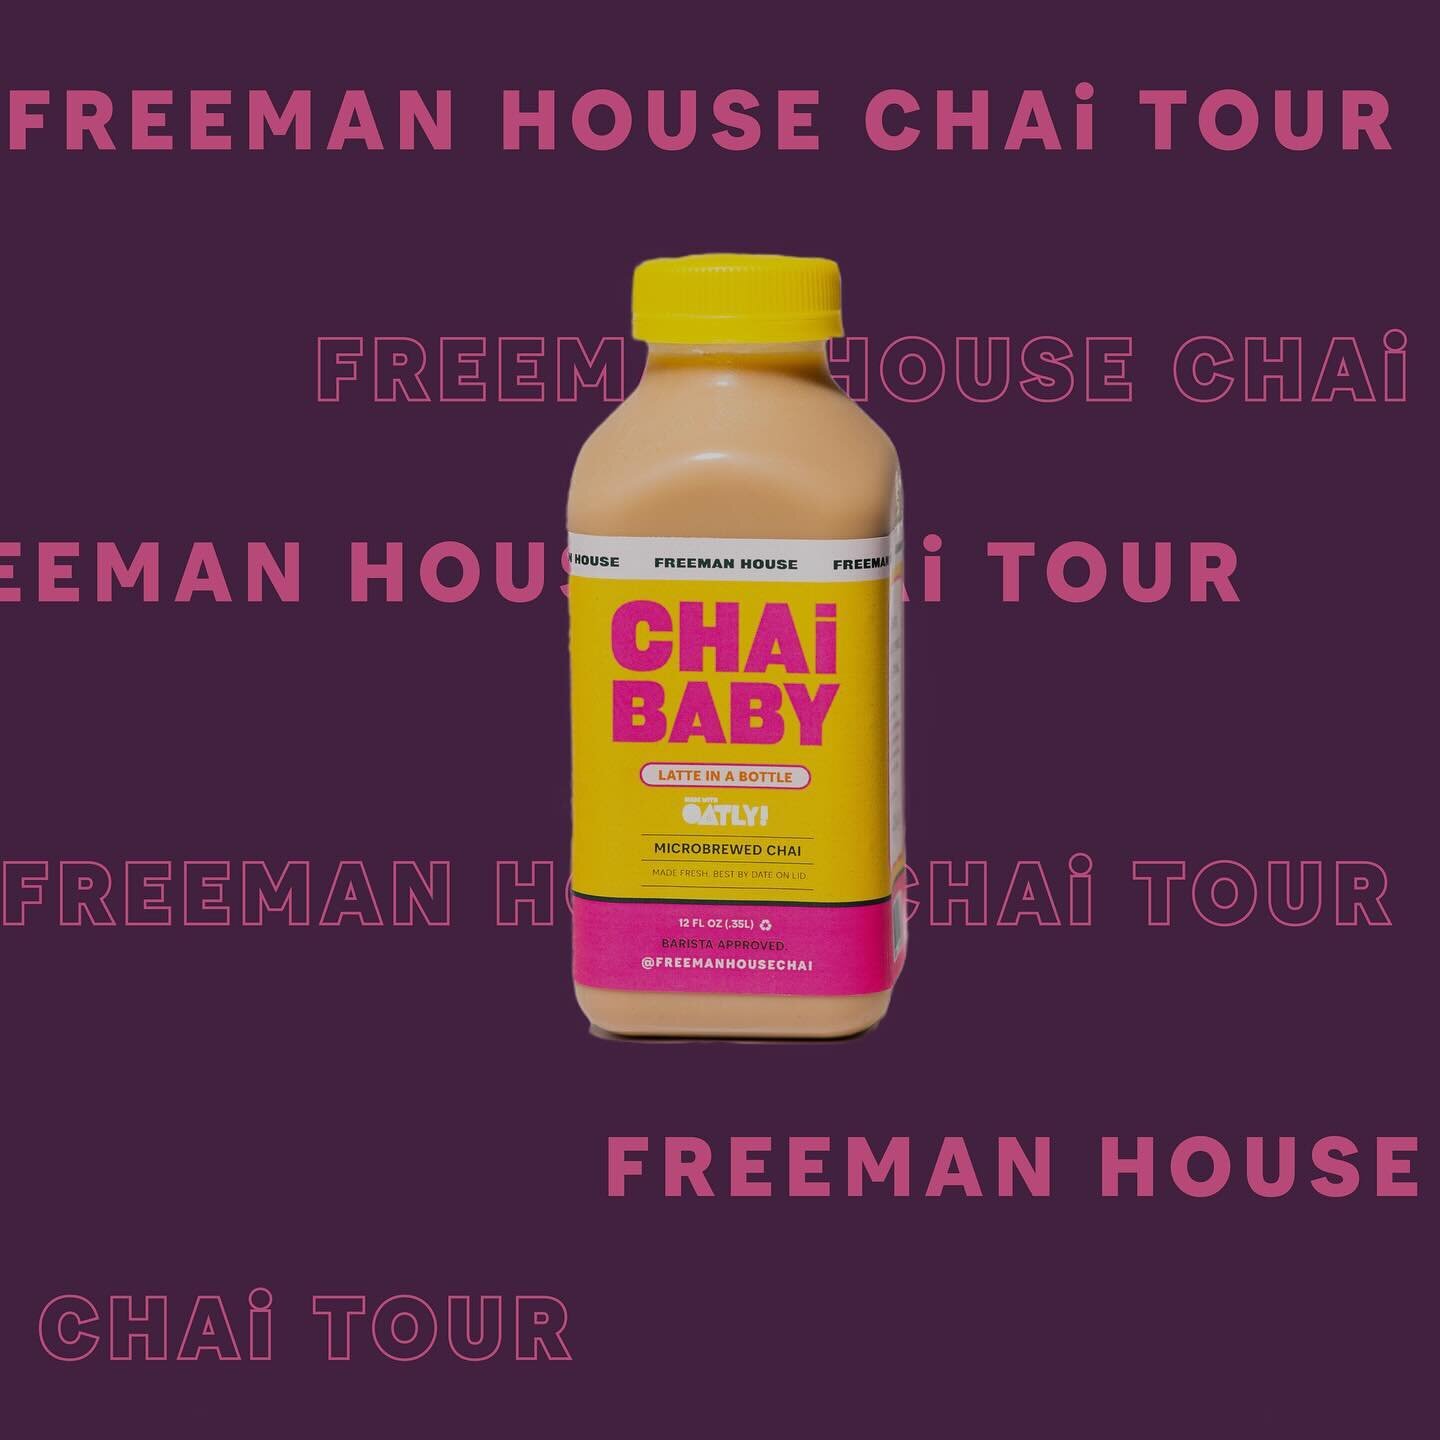 Chai City, my city! CHAi Baby tour is in full effect and we&rsquo;re starting with the West Side. Swipe to see where to shop CHAi Baby.

and that&rsquo;s not all, we have more neighborhoods coming your way, so stay tuned! 

#chai #madeinchicago #chic